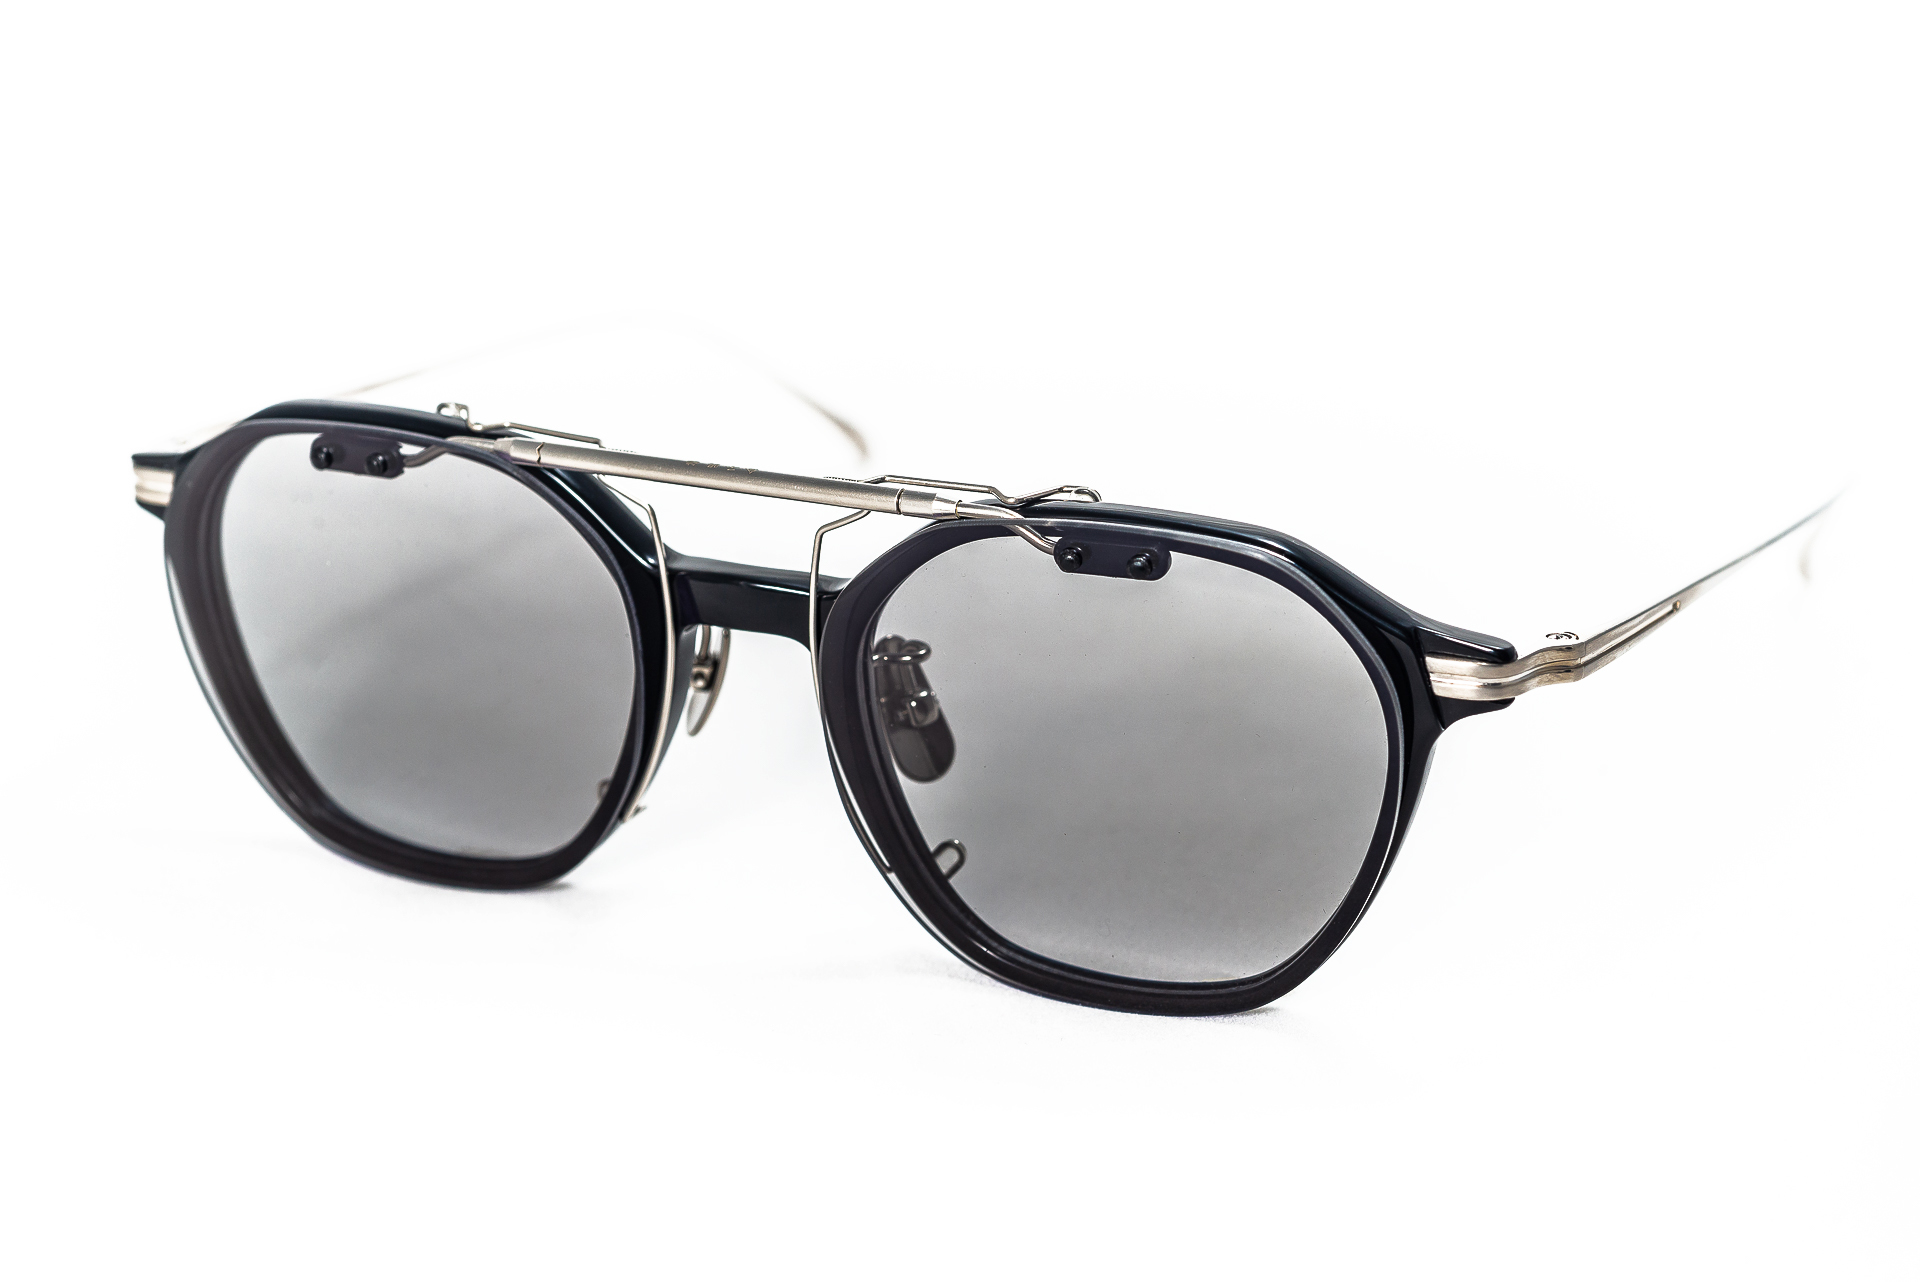 KJ-55-BKBS (with Clip-on Sunglasses)- The New Black ...